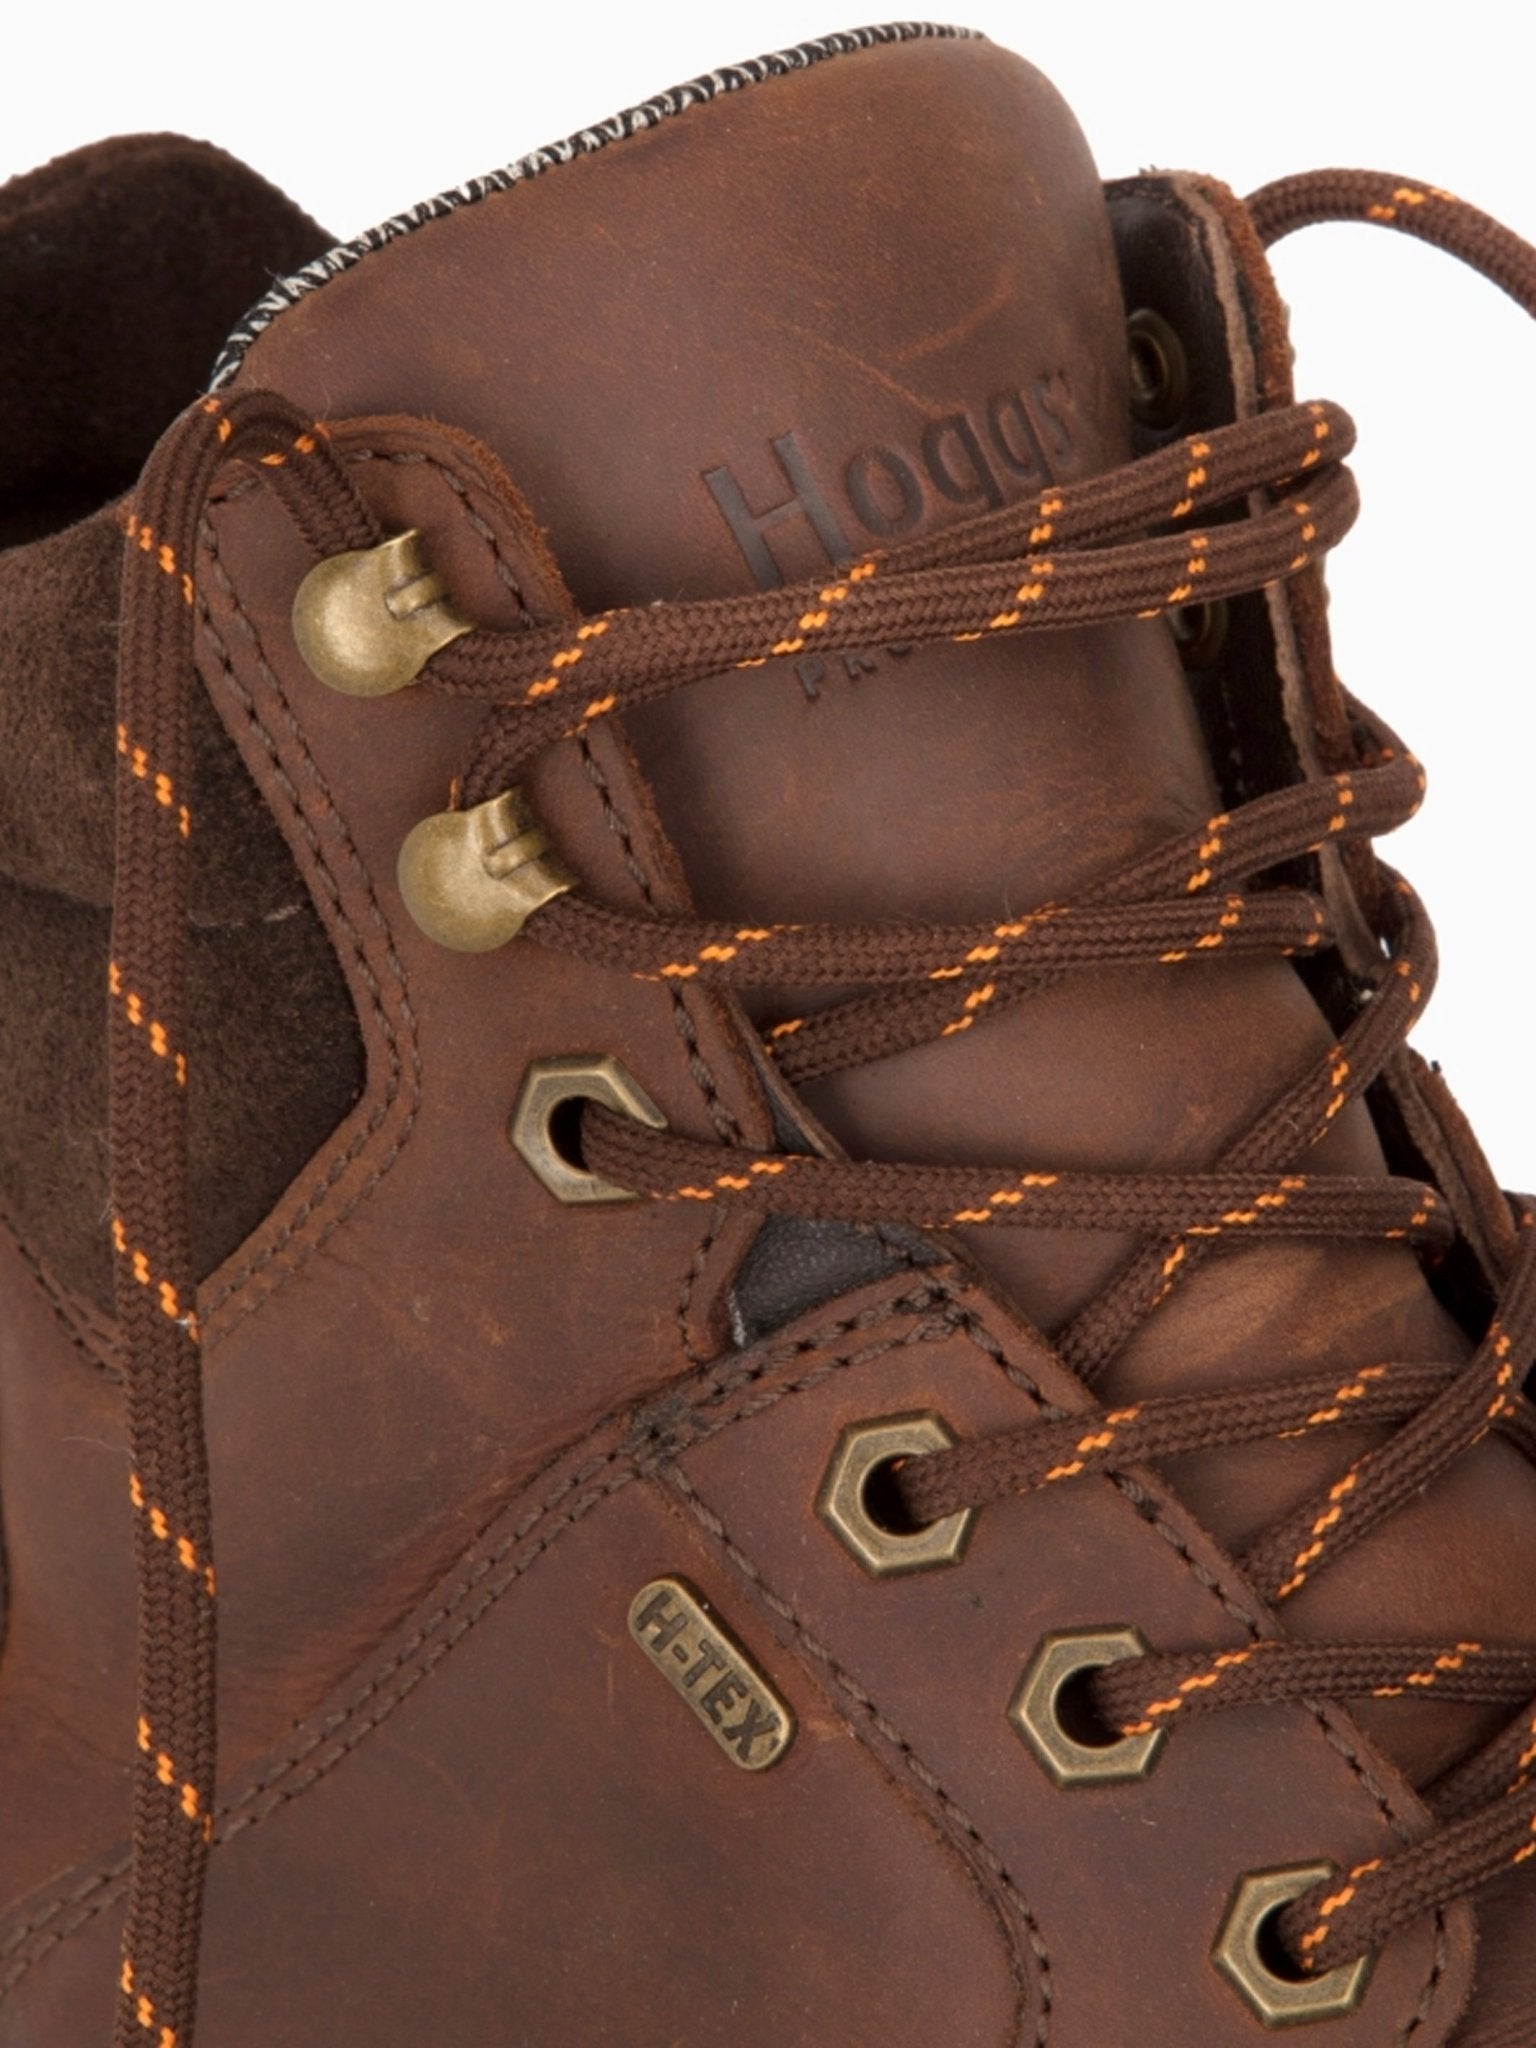 Hoggs of Fife Hoggs of Fife - Triton Waterproof Mens boot - Mens Waterproof Leather Boots - Lace up Safety Footwear